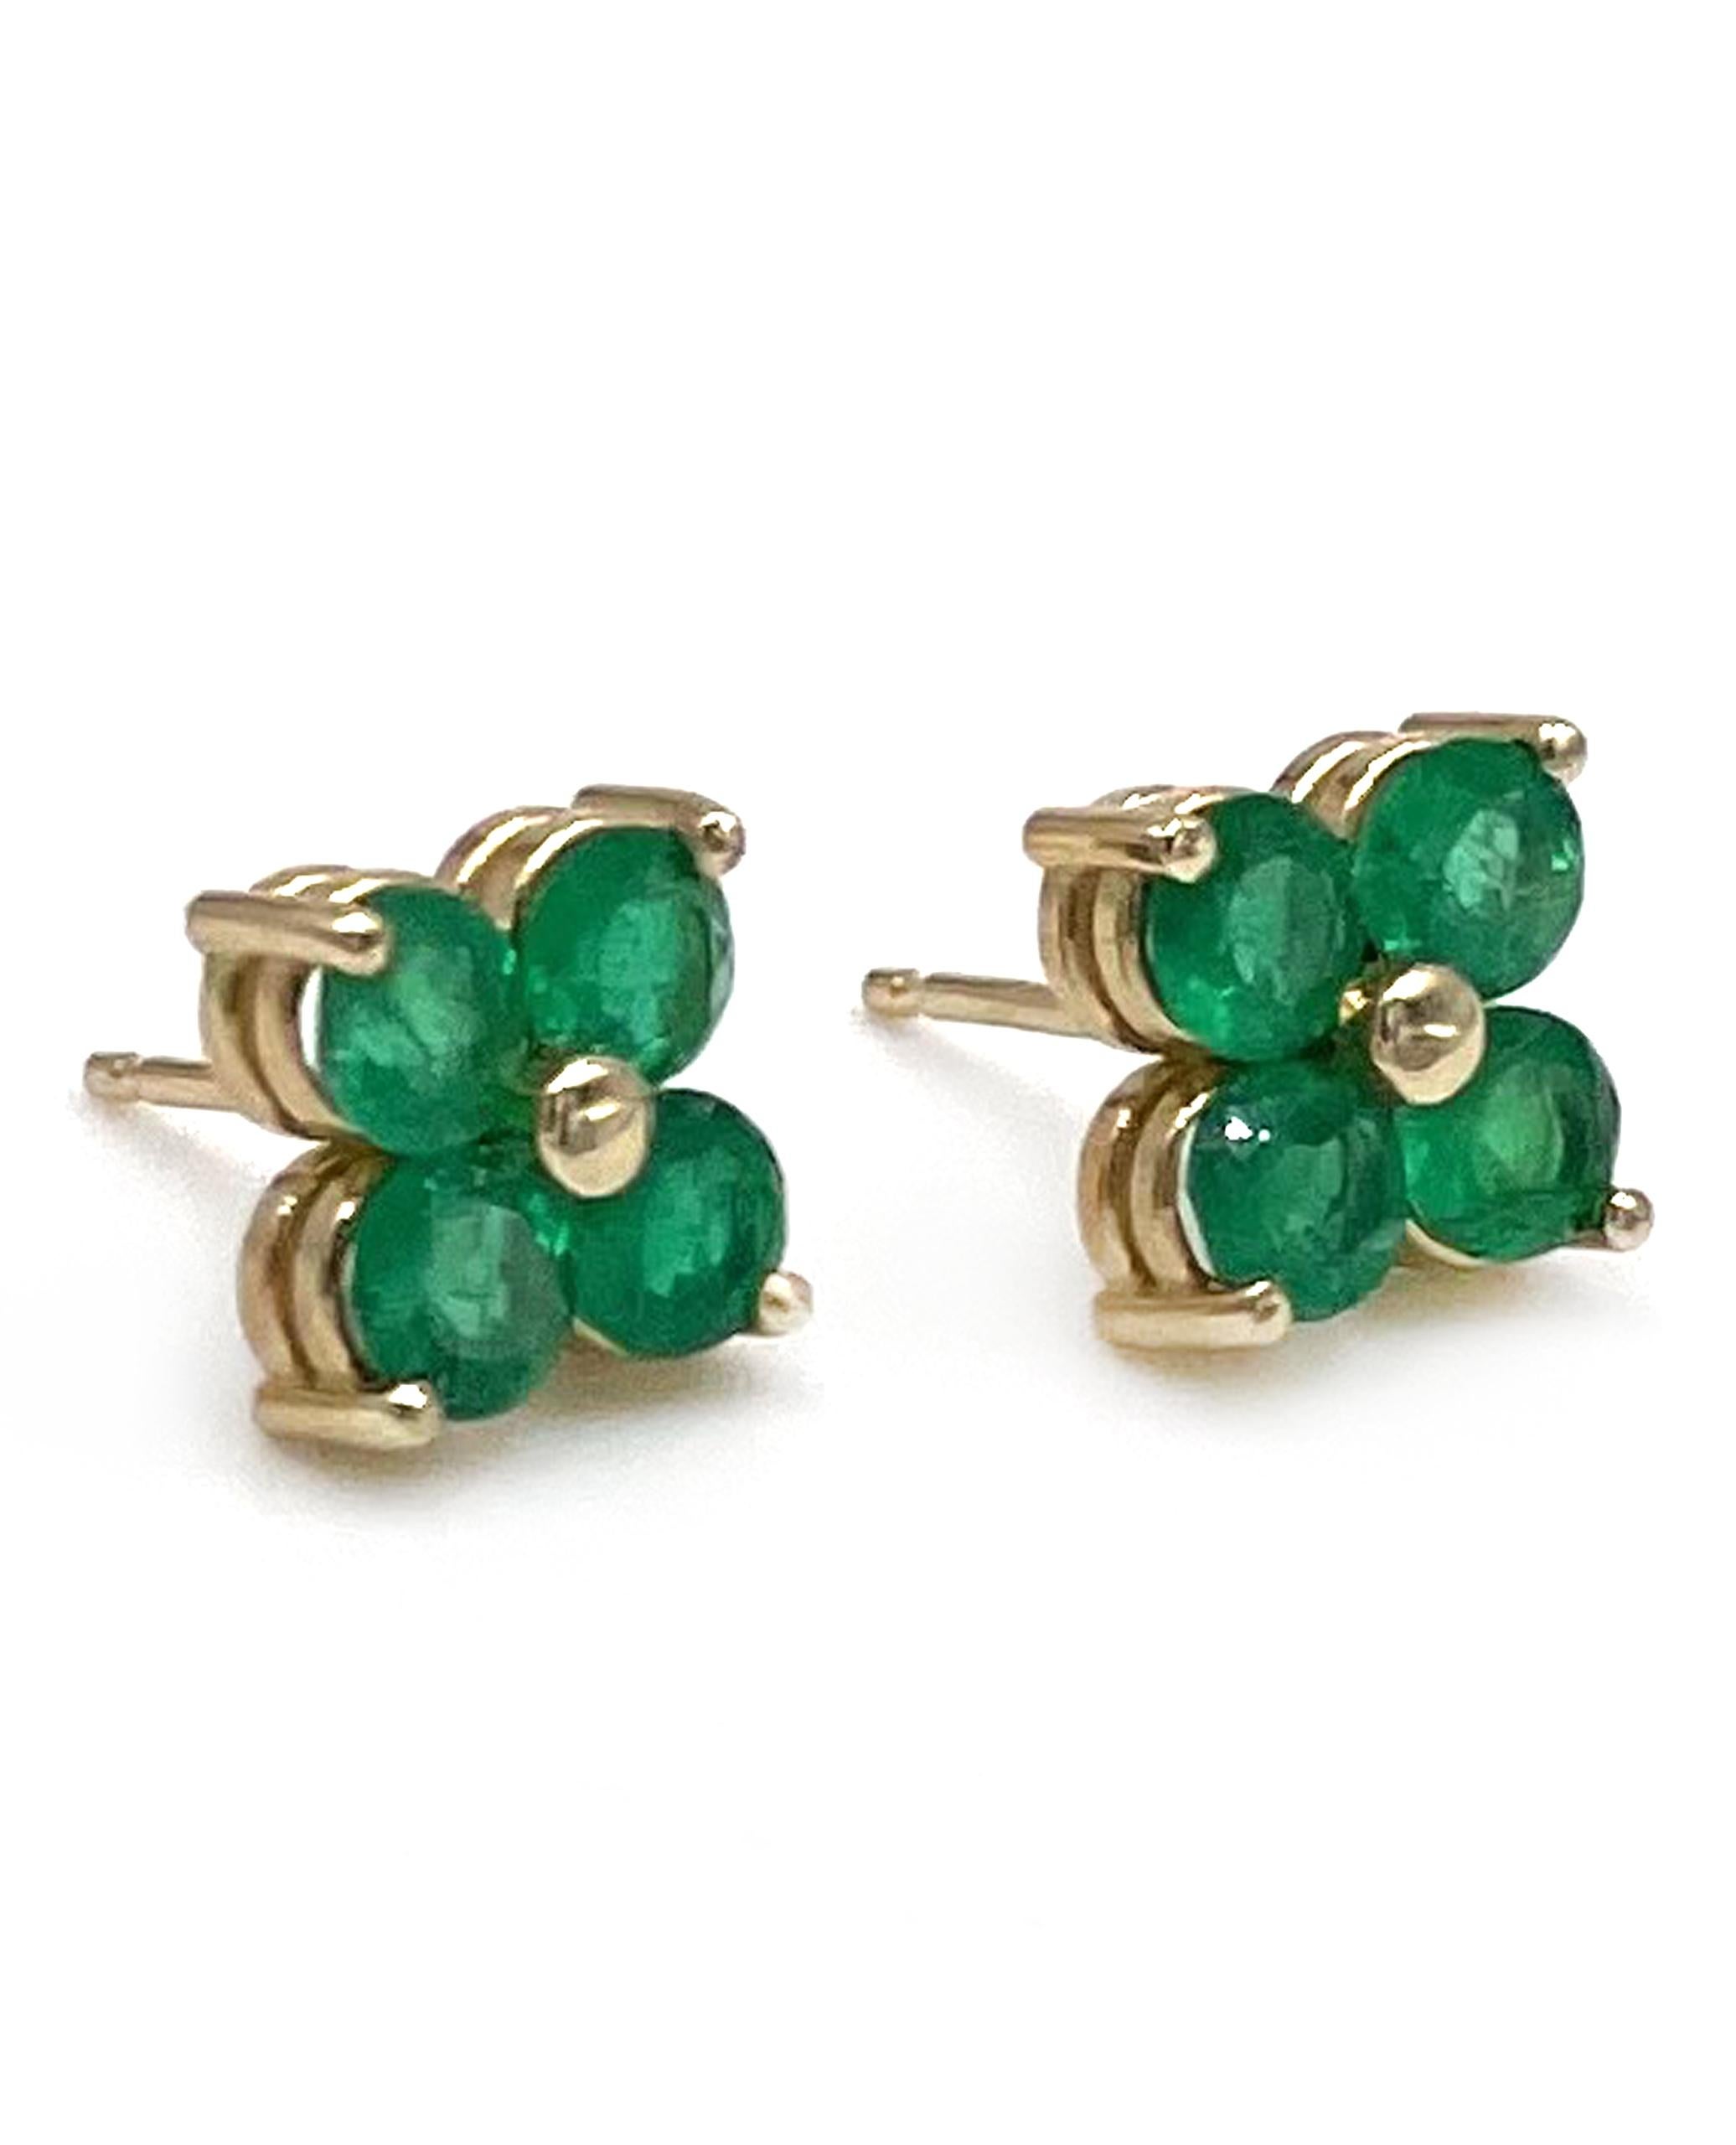 Pair of 14K yellow gold quatrefoil stud earrings with eight round emeralds 1.45 carats total weight.

* Jumbo earring push backs are included.